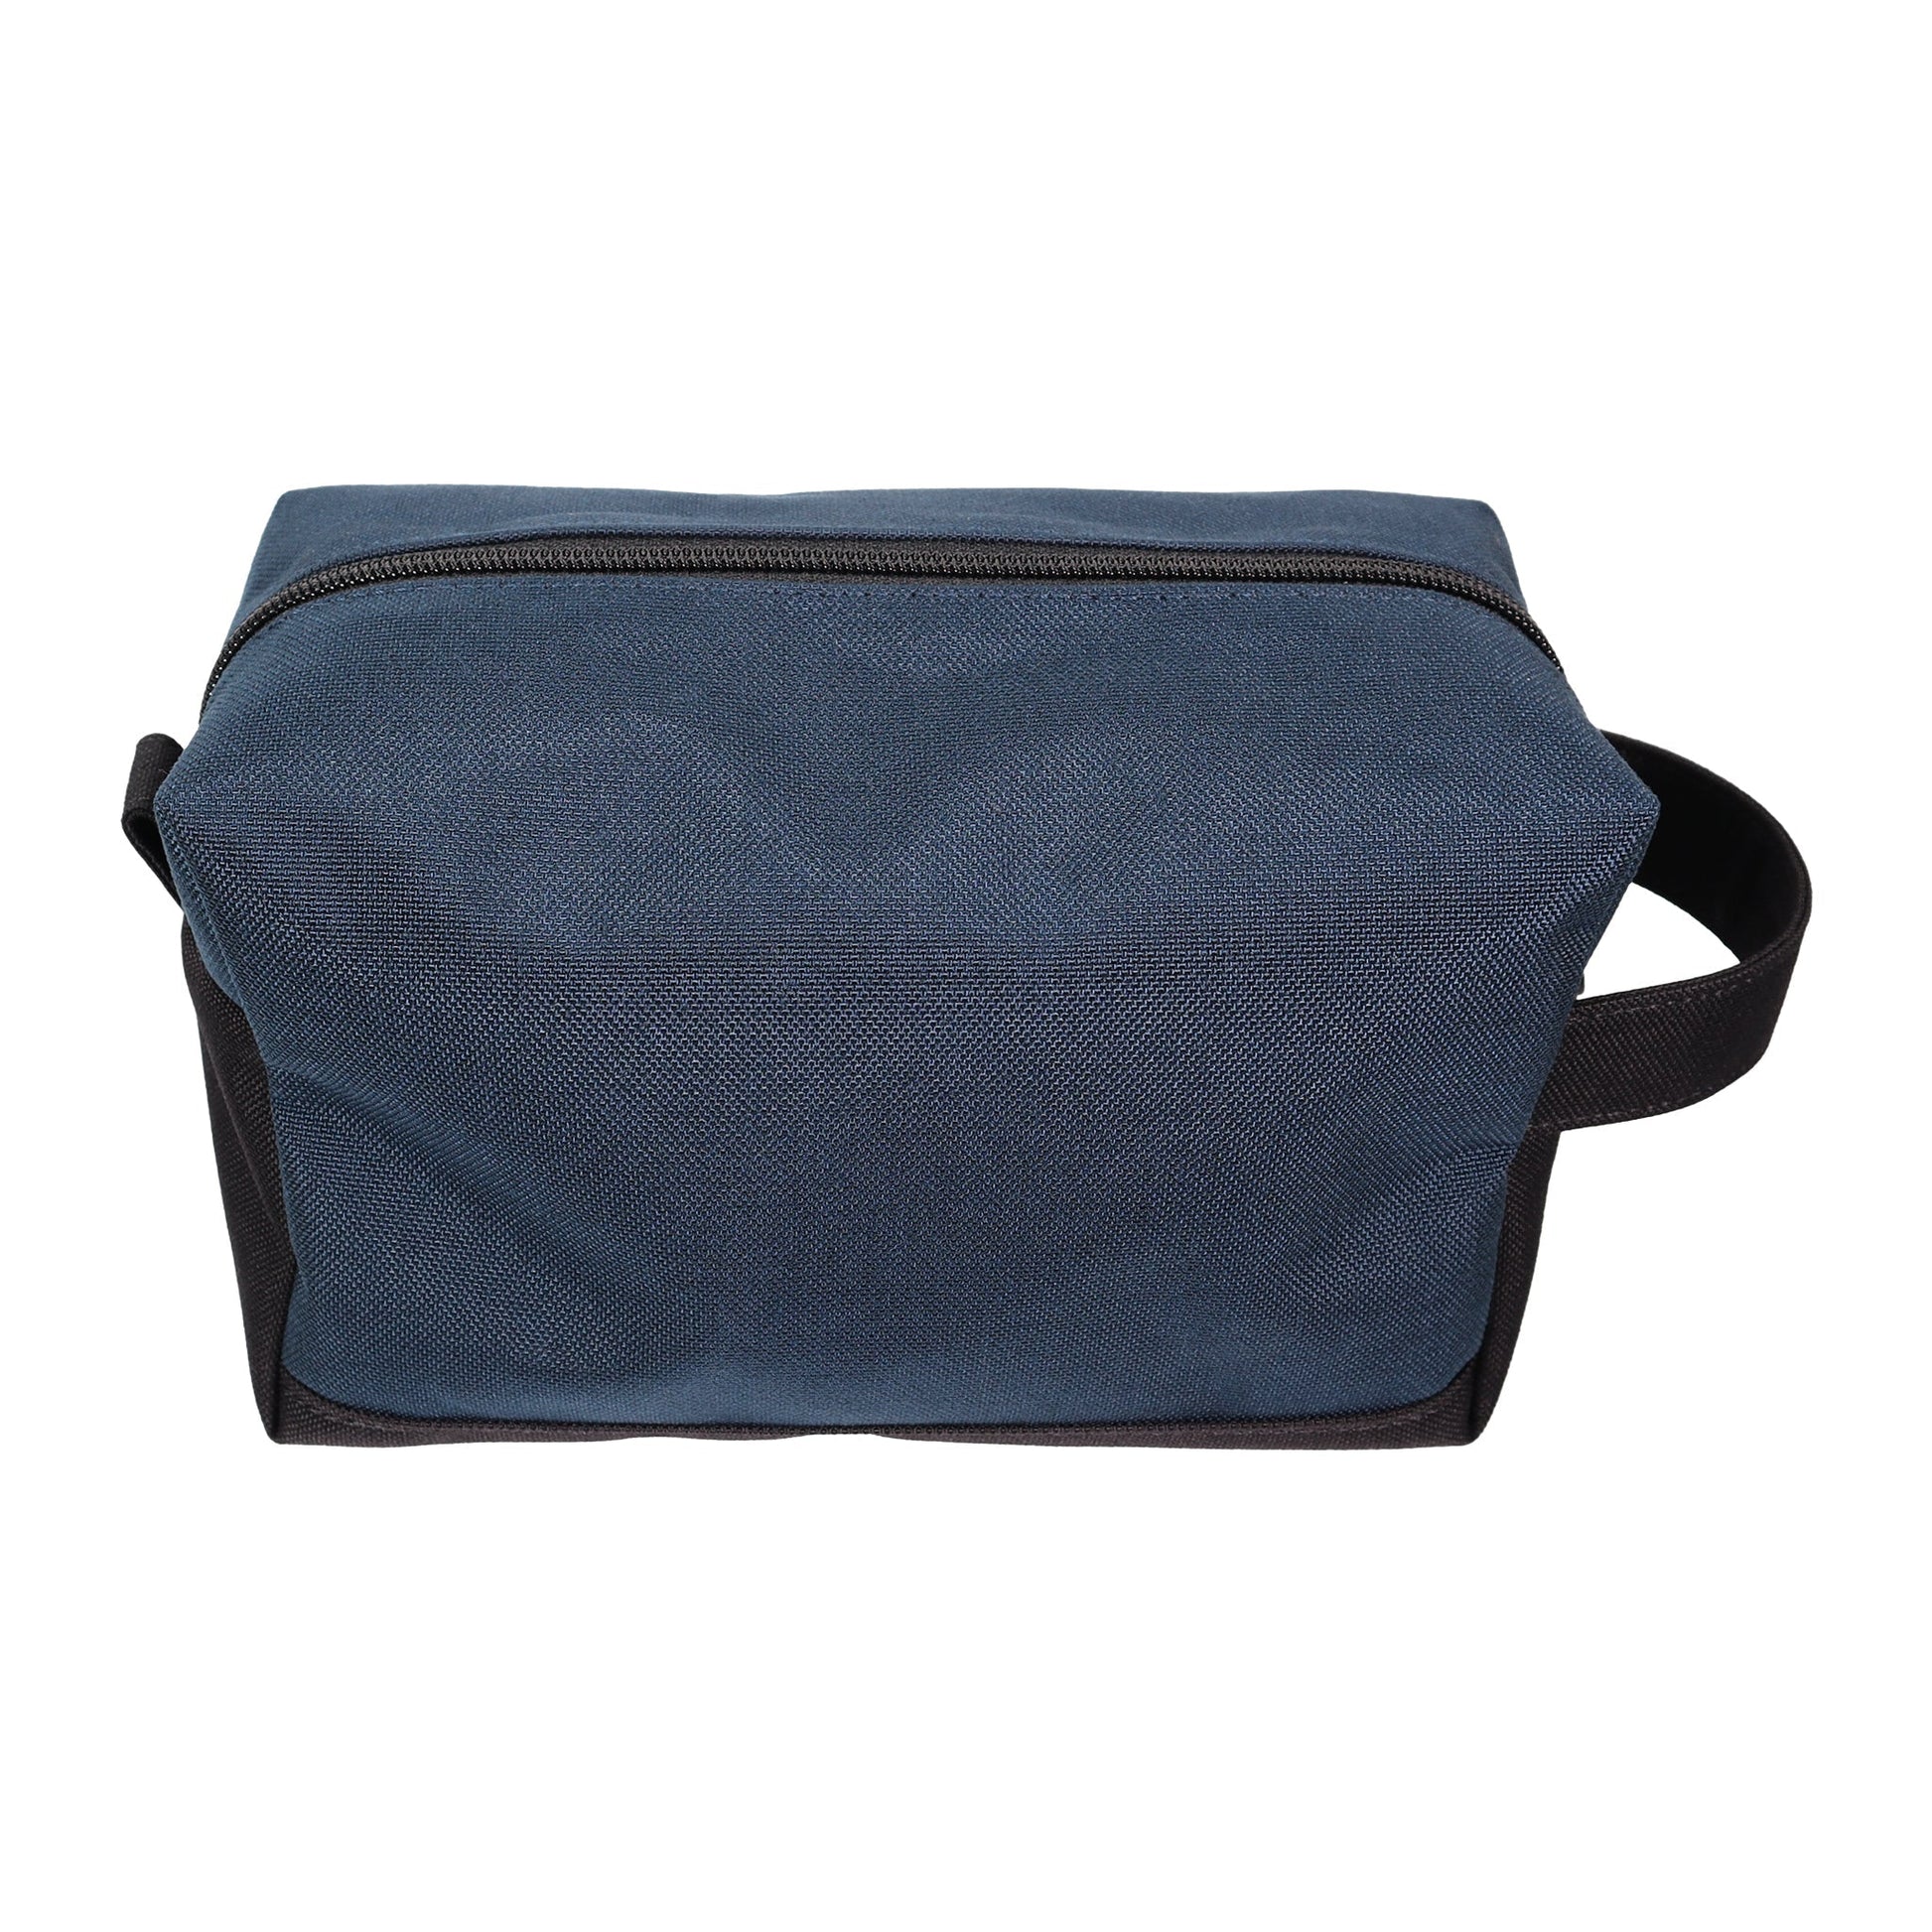 Navy Blue and Black Tall Canvas Toiletry Bag